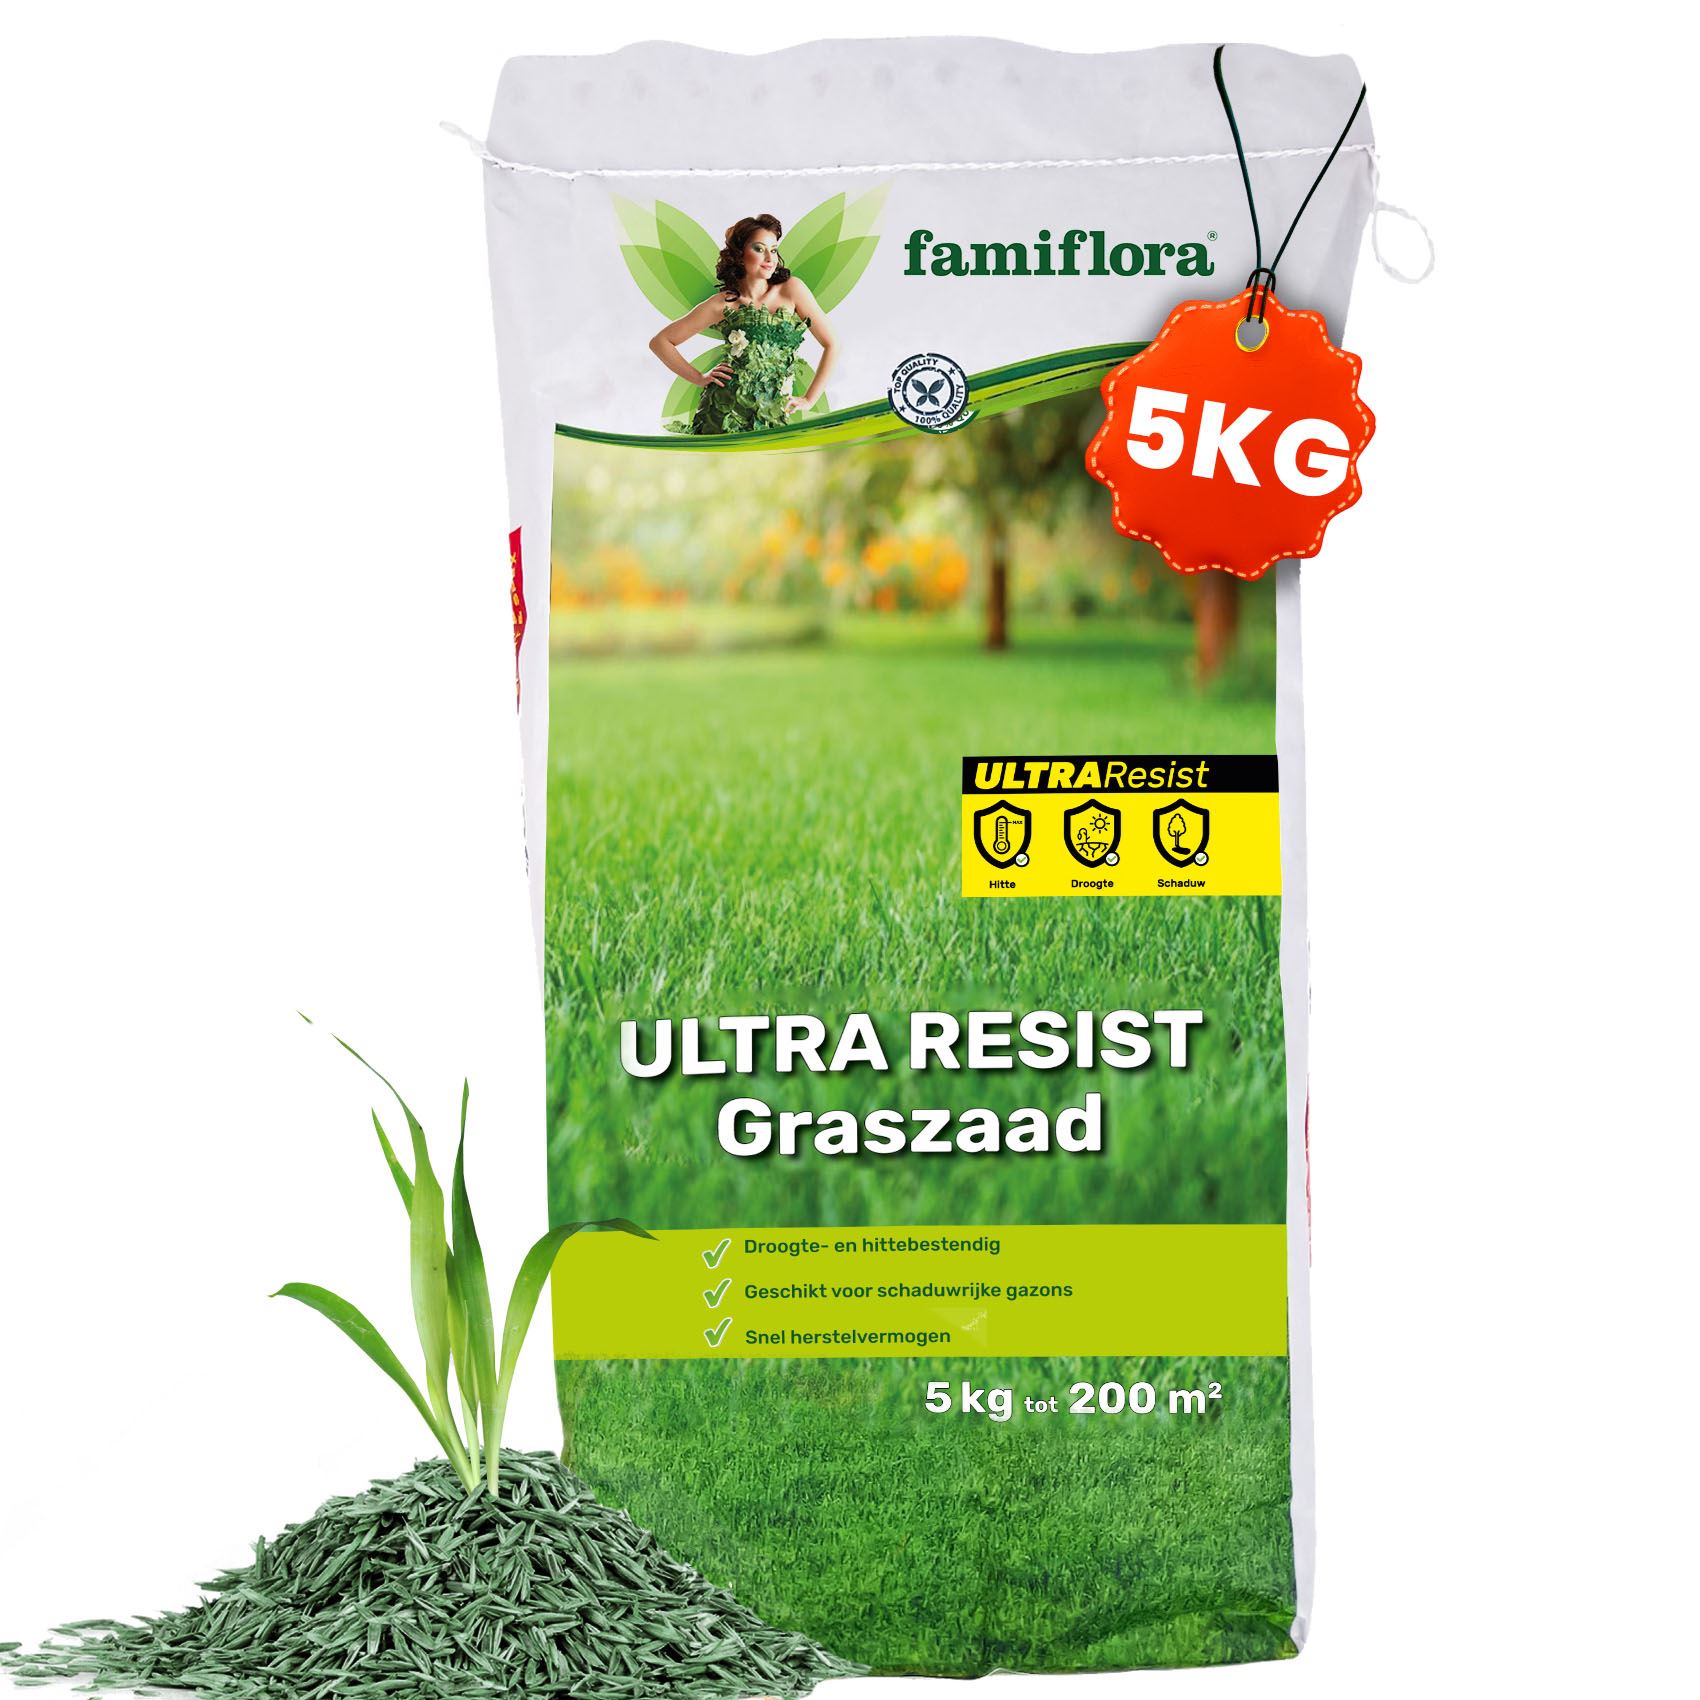 Famiflora Ultra resist grass seed 5 kg (up to 200 m²)